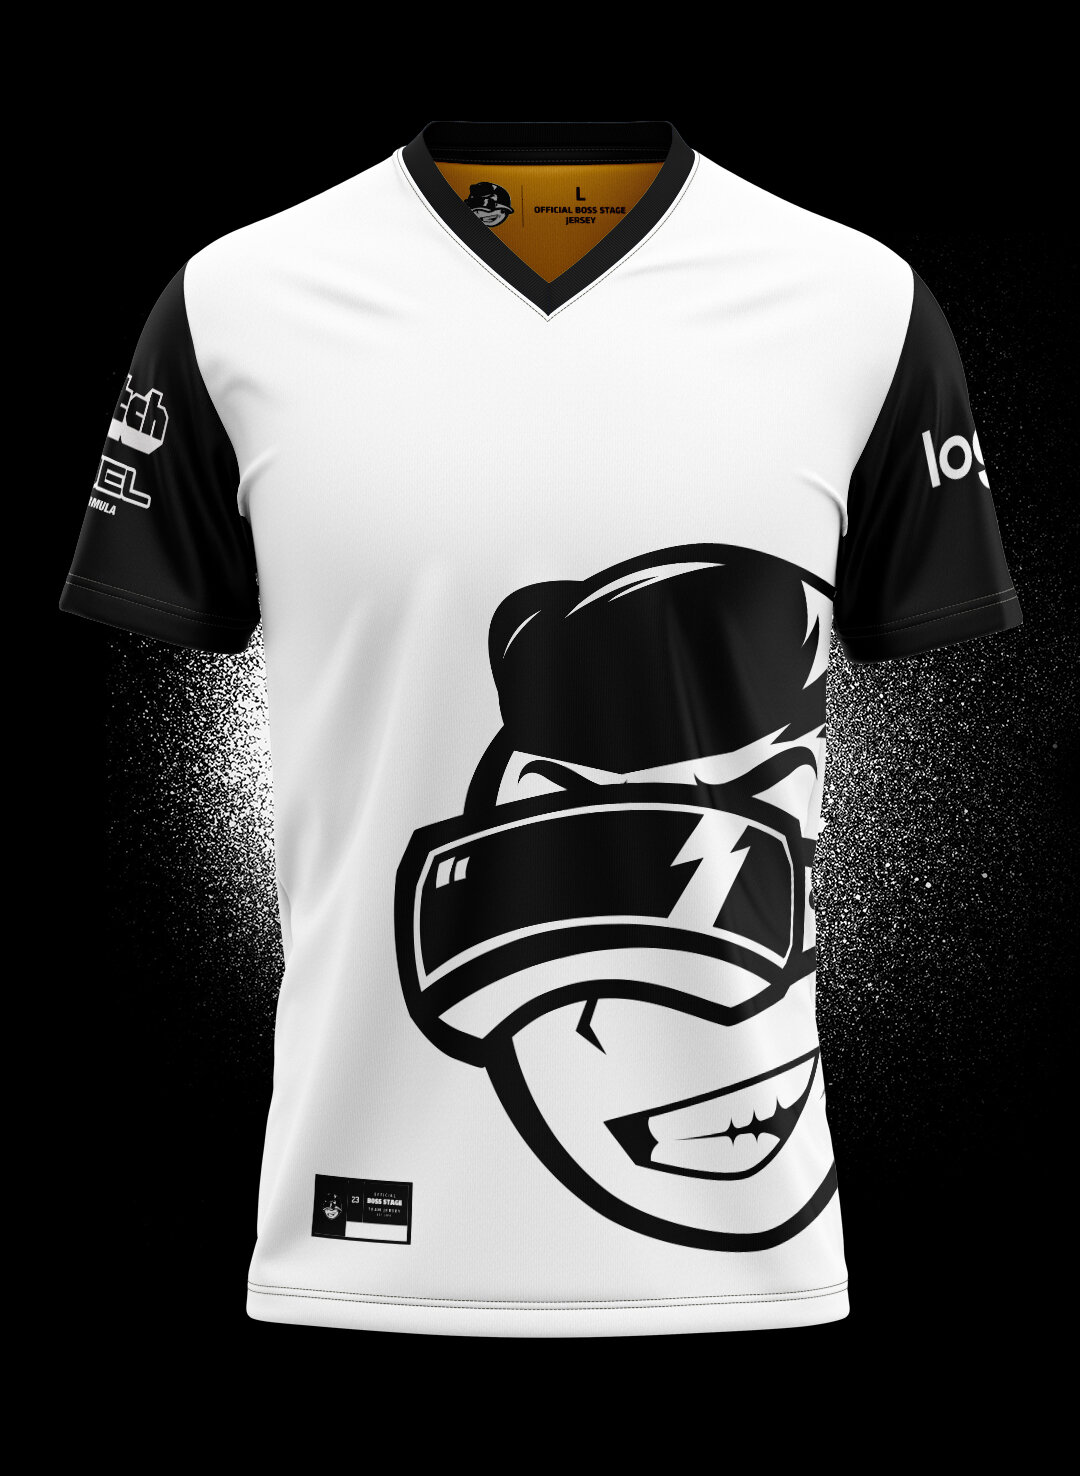 Jersery-concept_1080x1920_inverted2.jpg